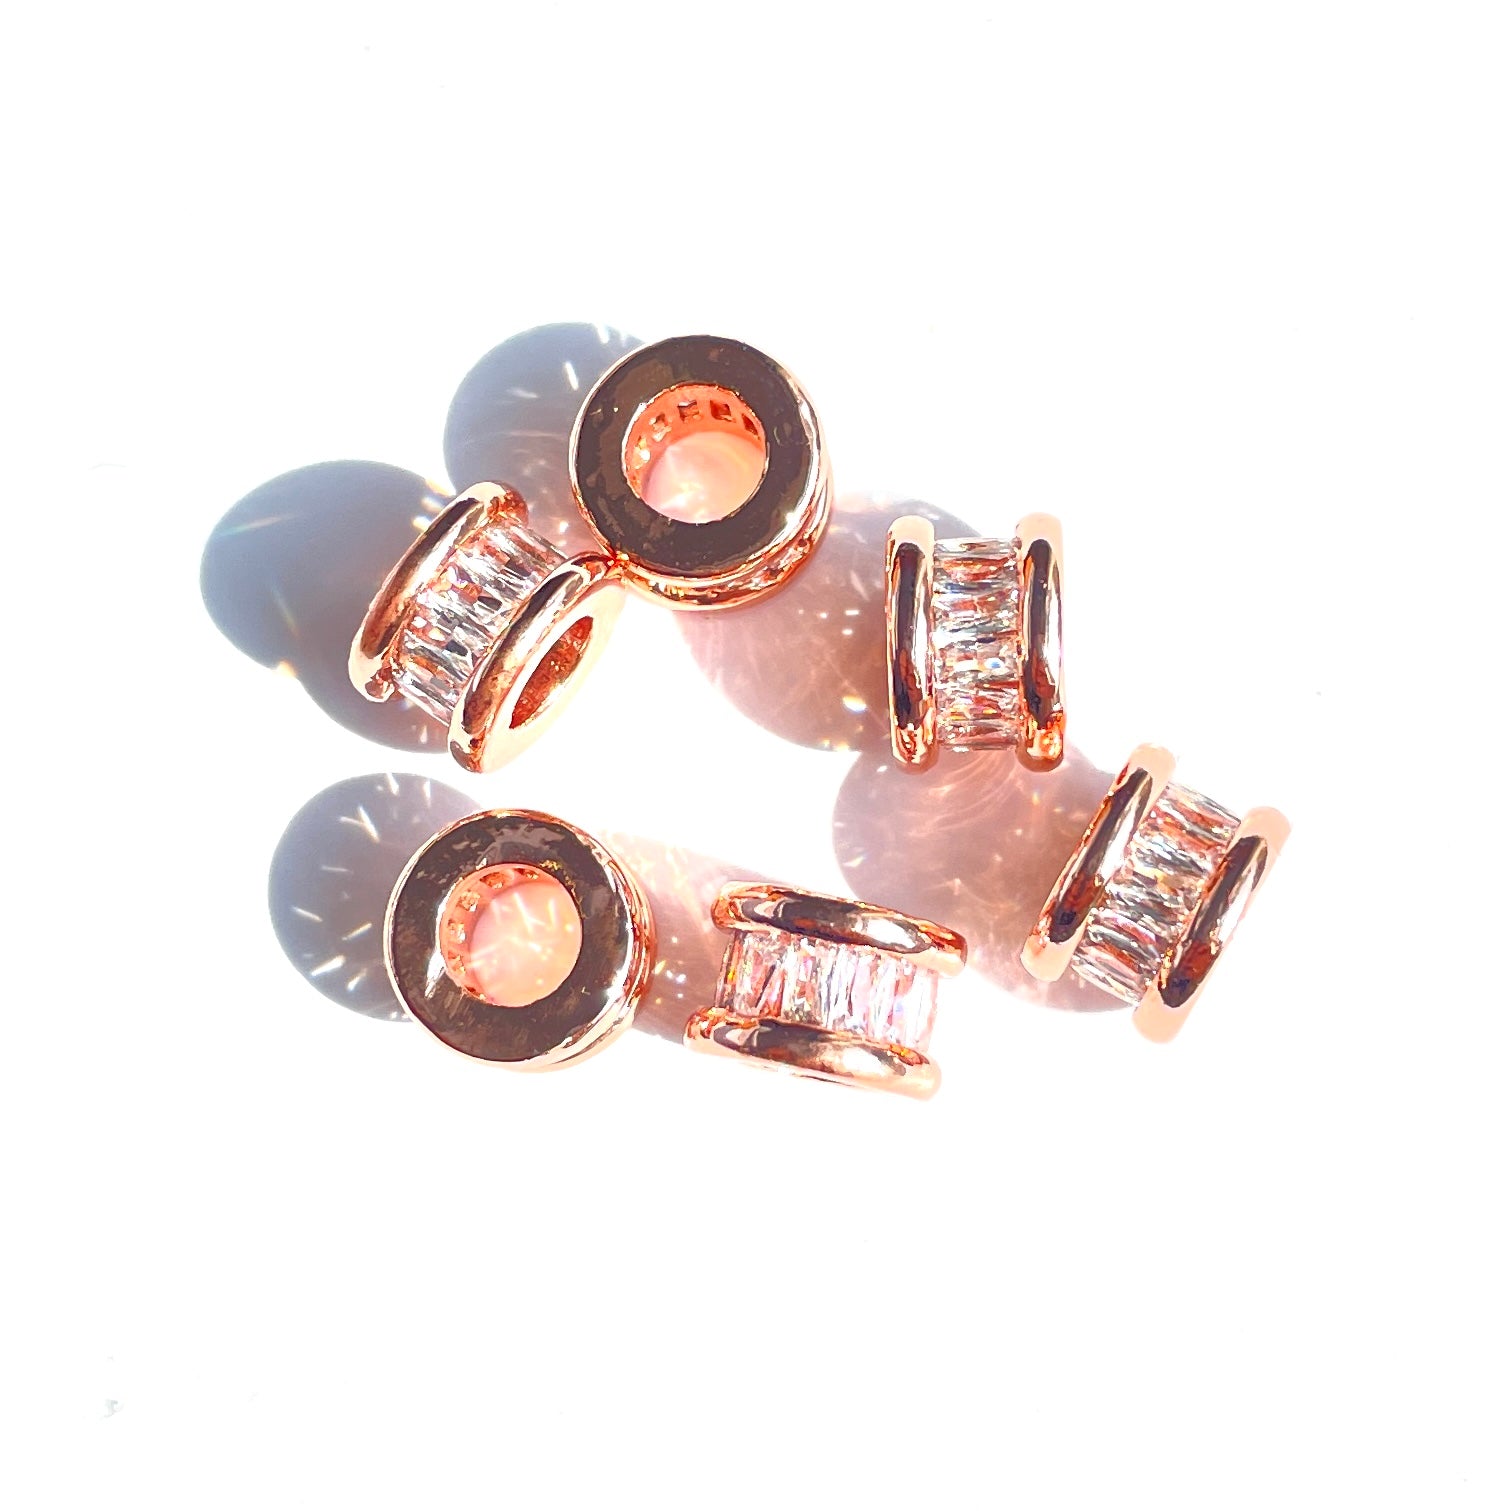 10pcs/lot 9*6mm CZ Paved Big Hole Wheel Spacers Rose Gold CZ Paved Spacers Big Hole Beads New Spacers Arrivals Charms Beads Beyond